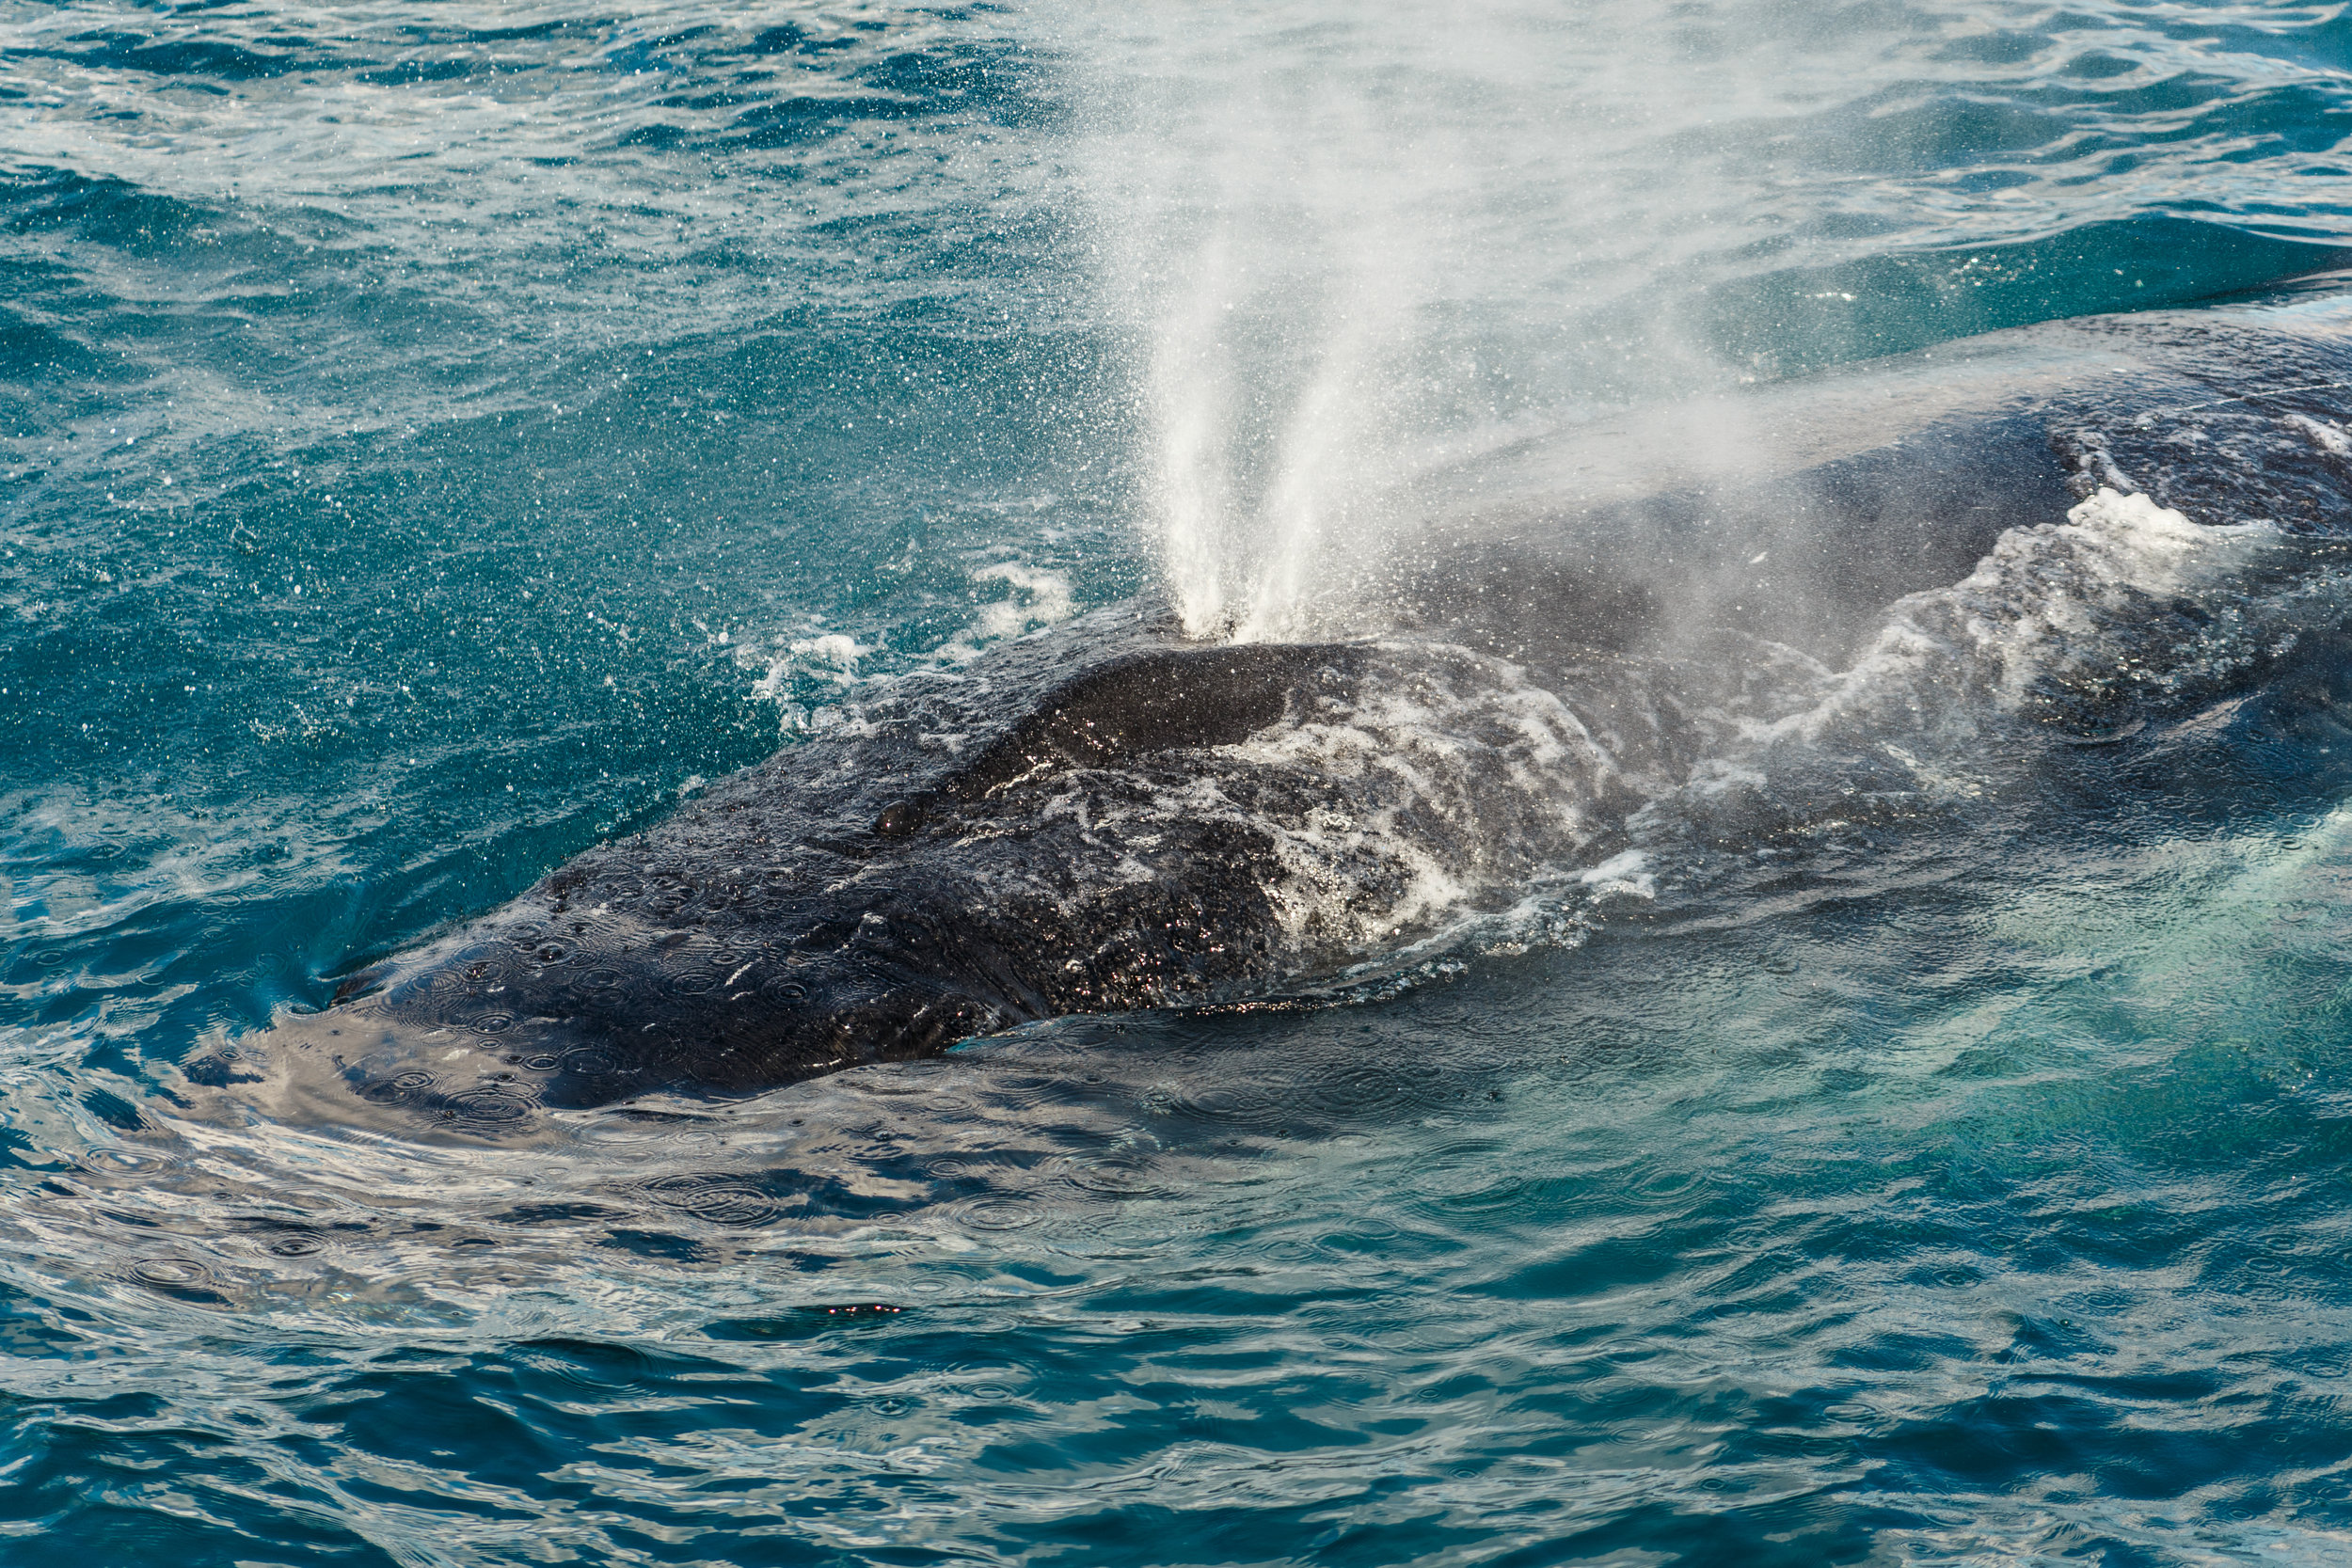  Blowhole spray from a humpback whale. 